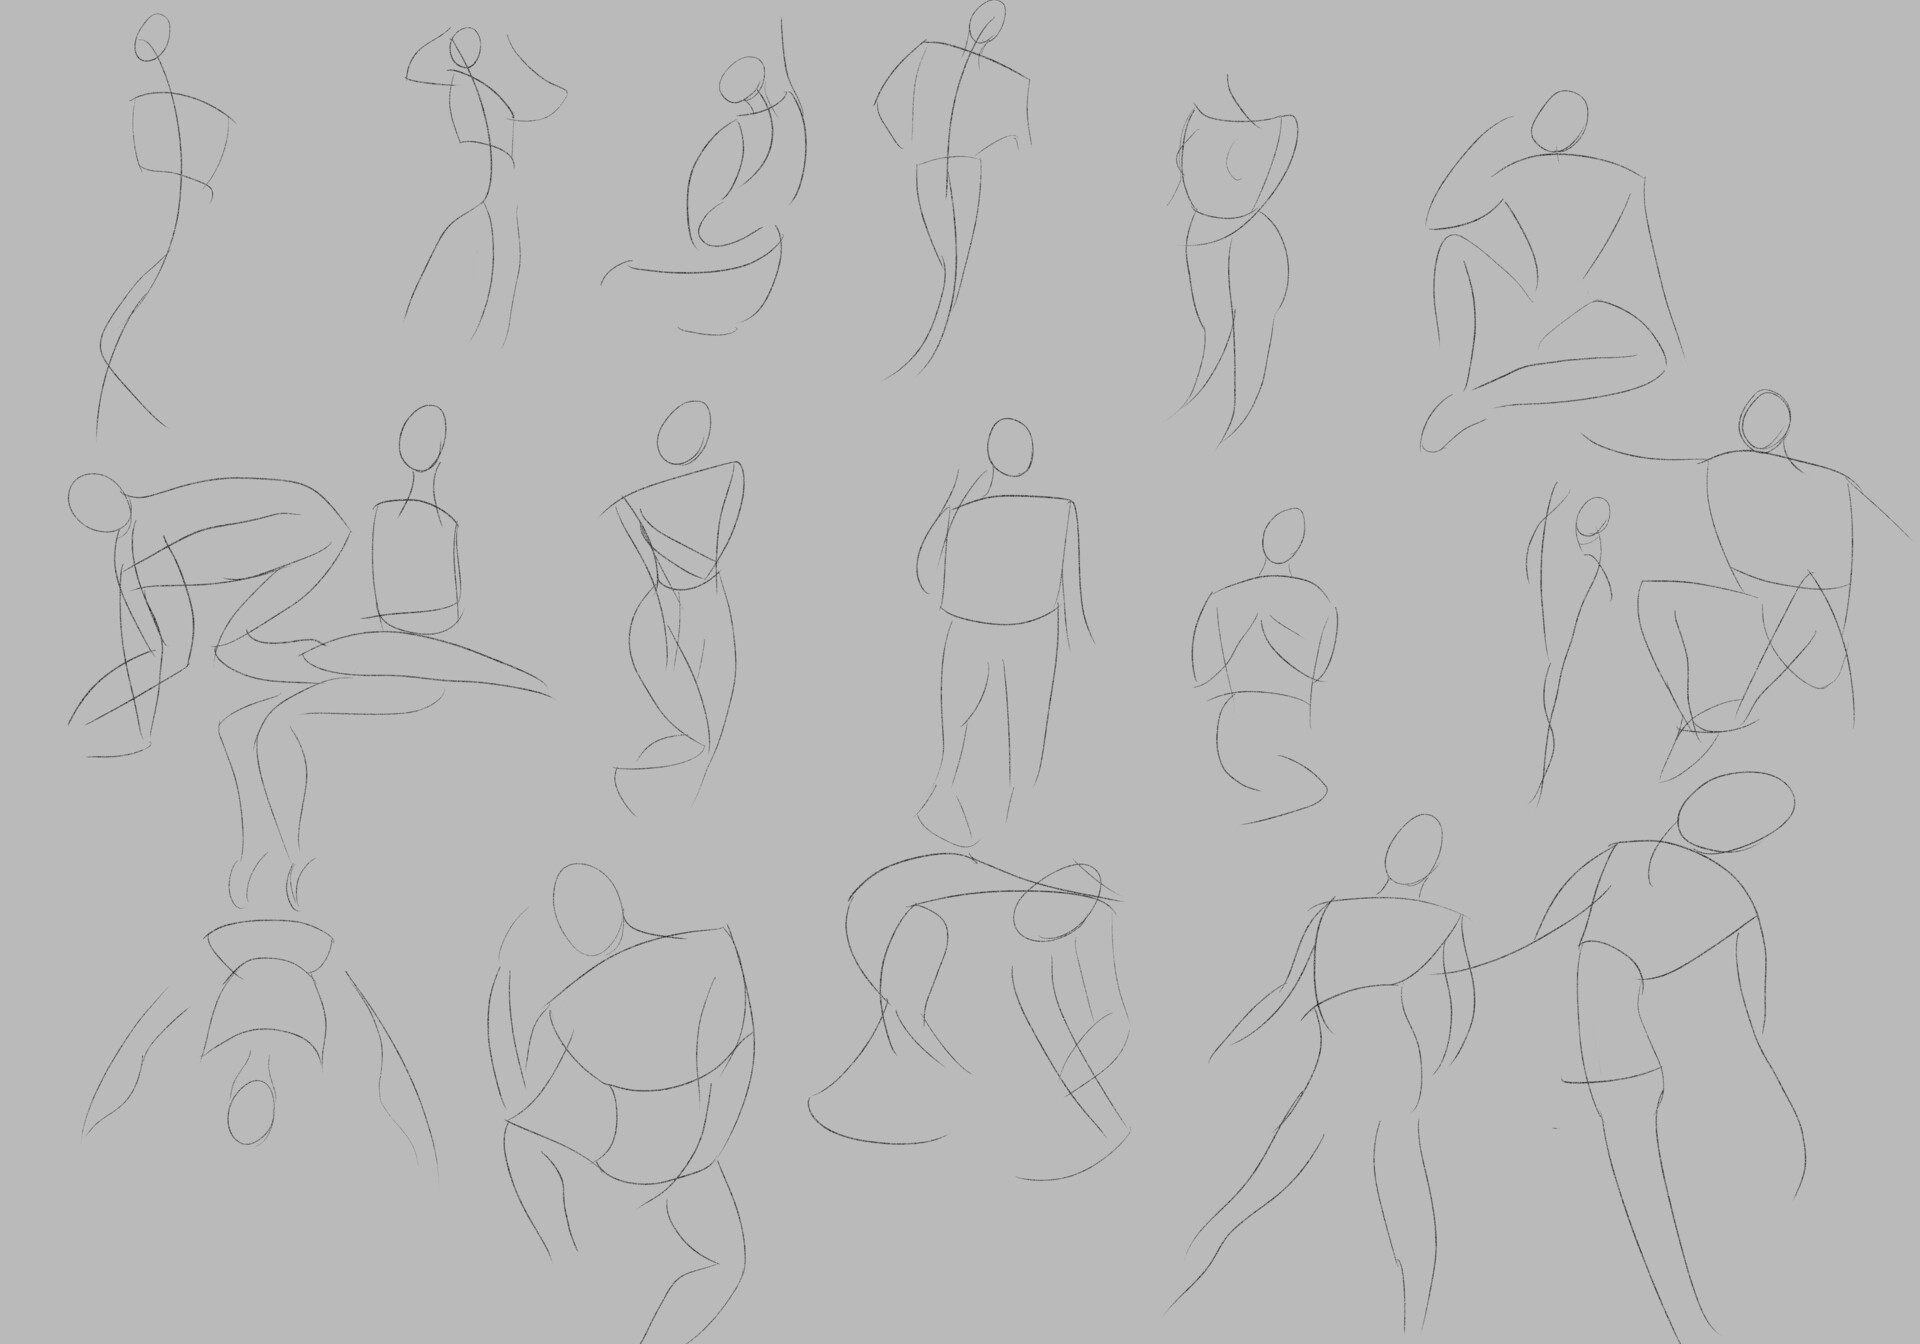 ArtStation - Gesture Sketches 6 and 7 (I think?)